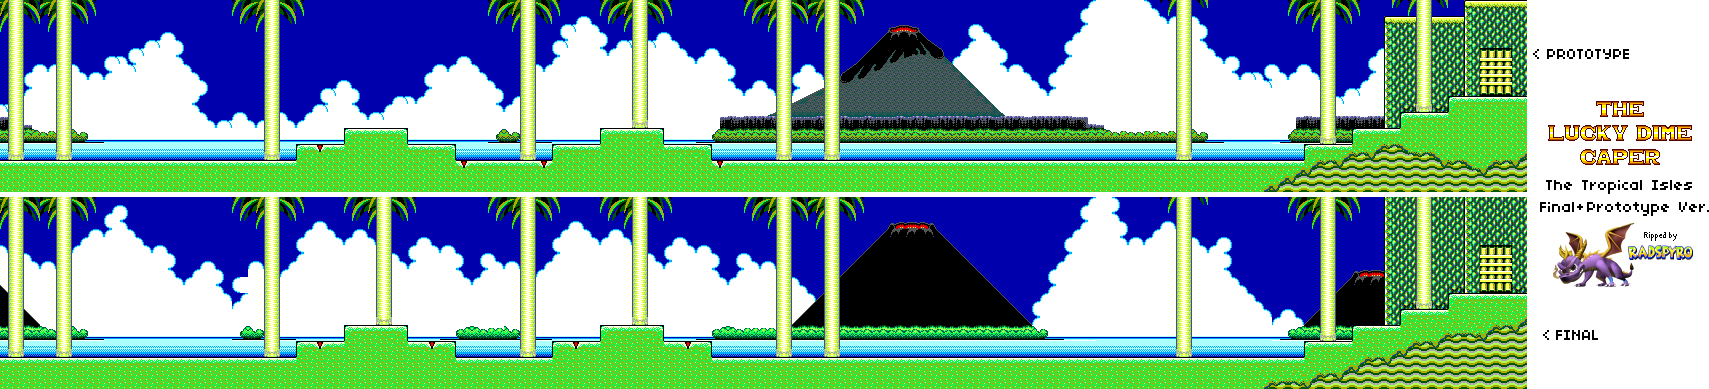 Lucky Dime Caper Starring Donald Duck - Stage 4: The Tropical Isles (Final & Prototype)